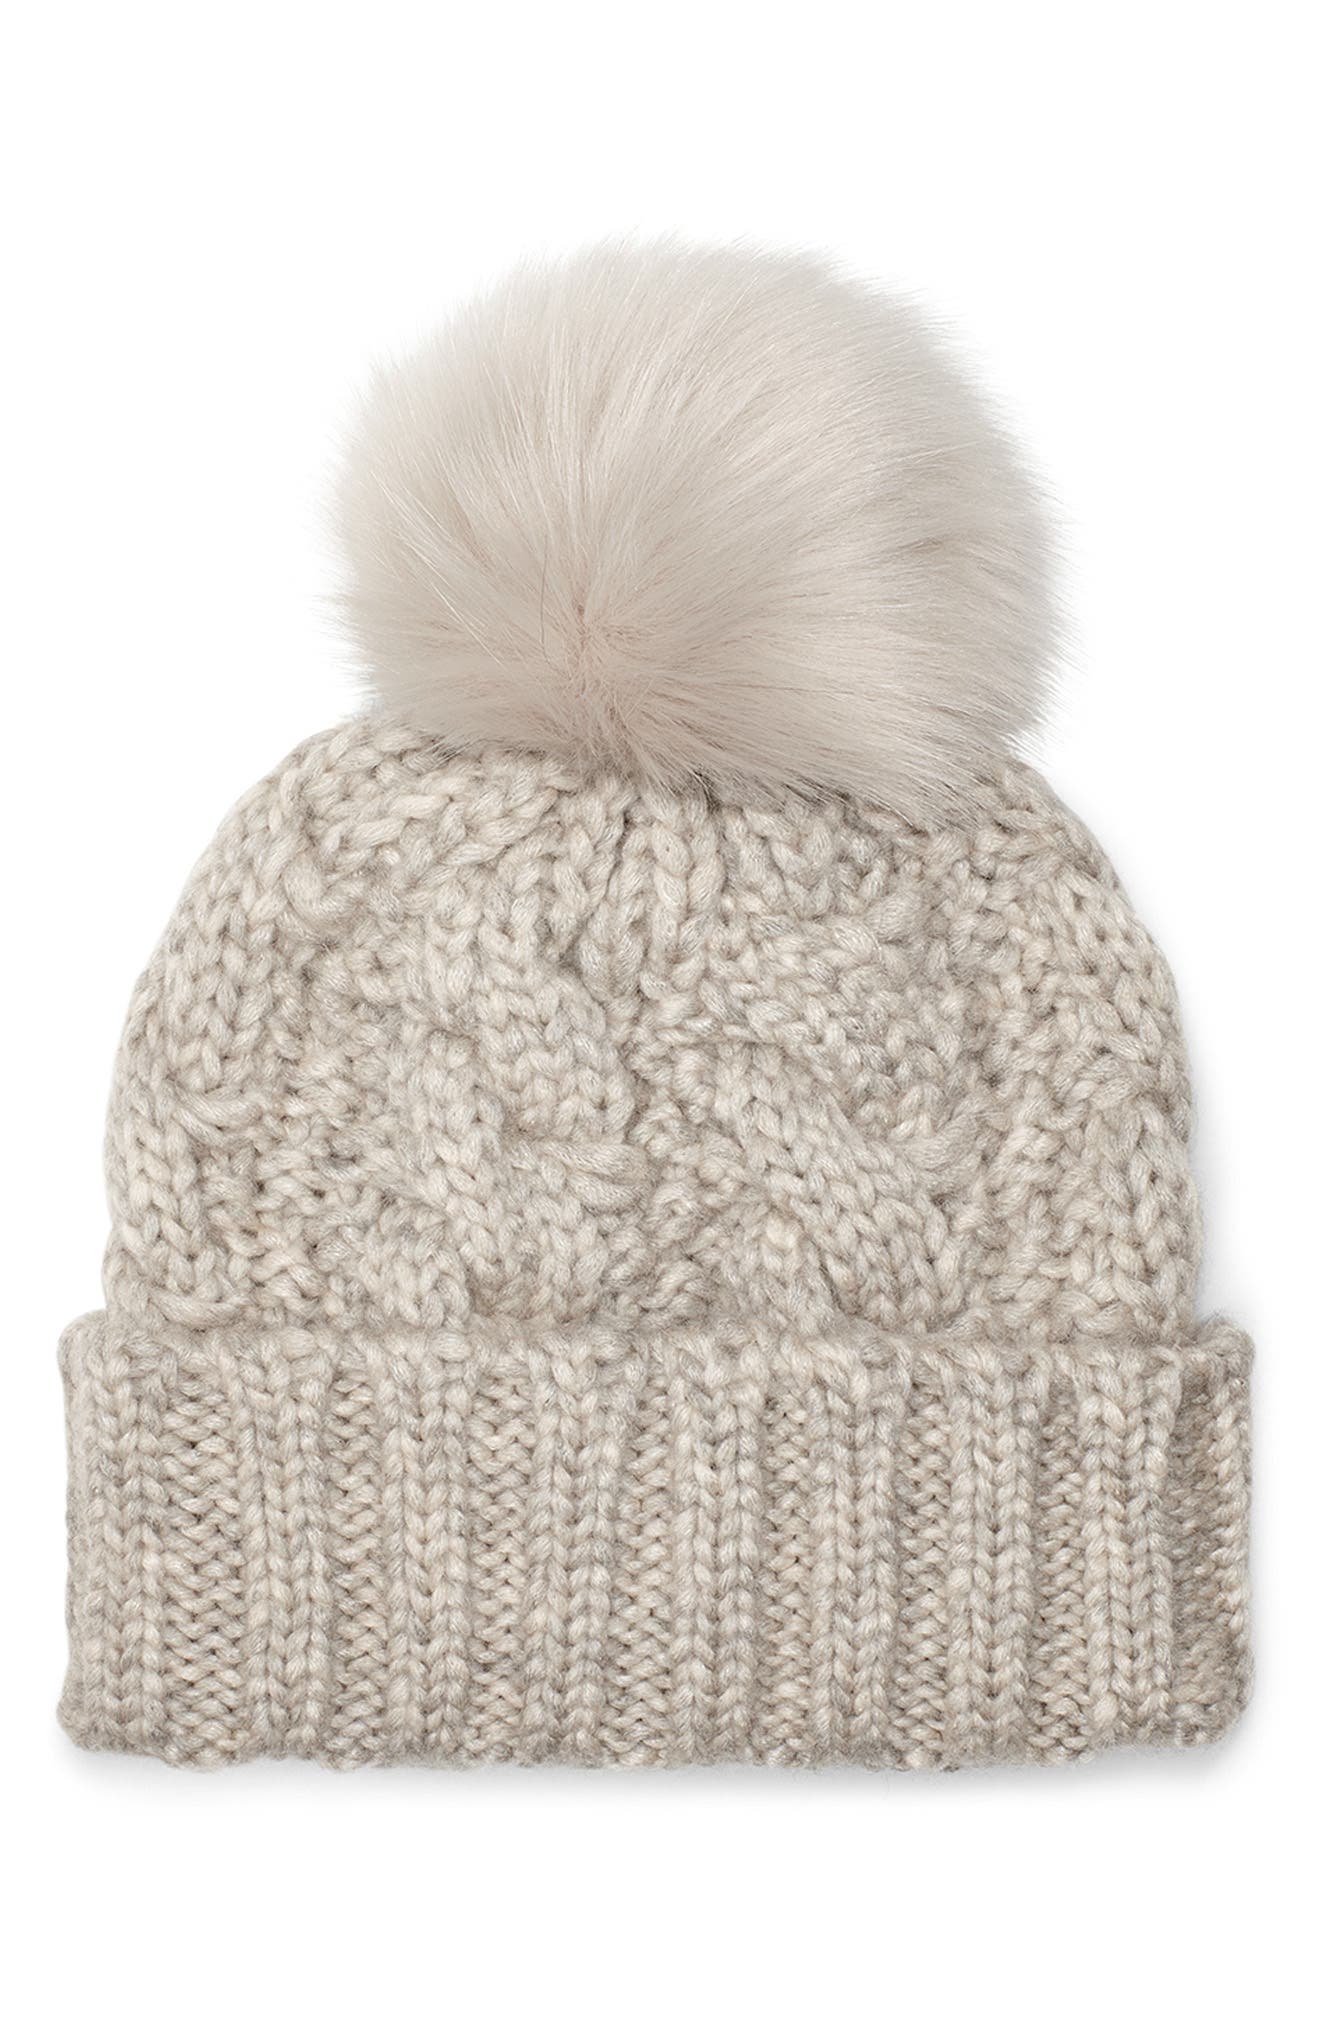 Makone Women Beanie Hat Winter Trendy Warm Soft Cap Slouch Thick Cable Knit Hat